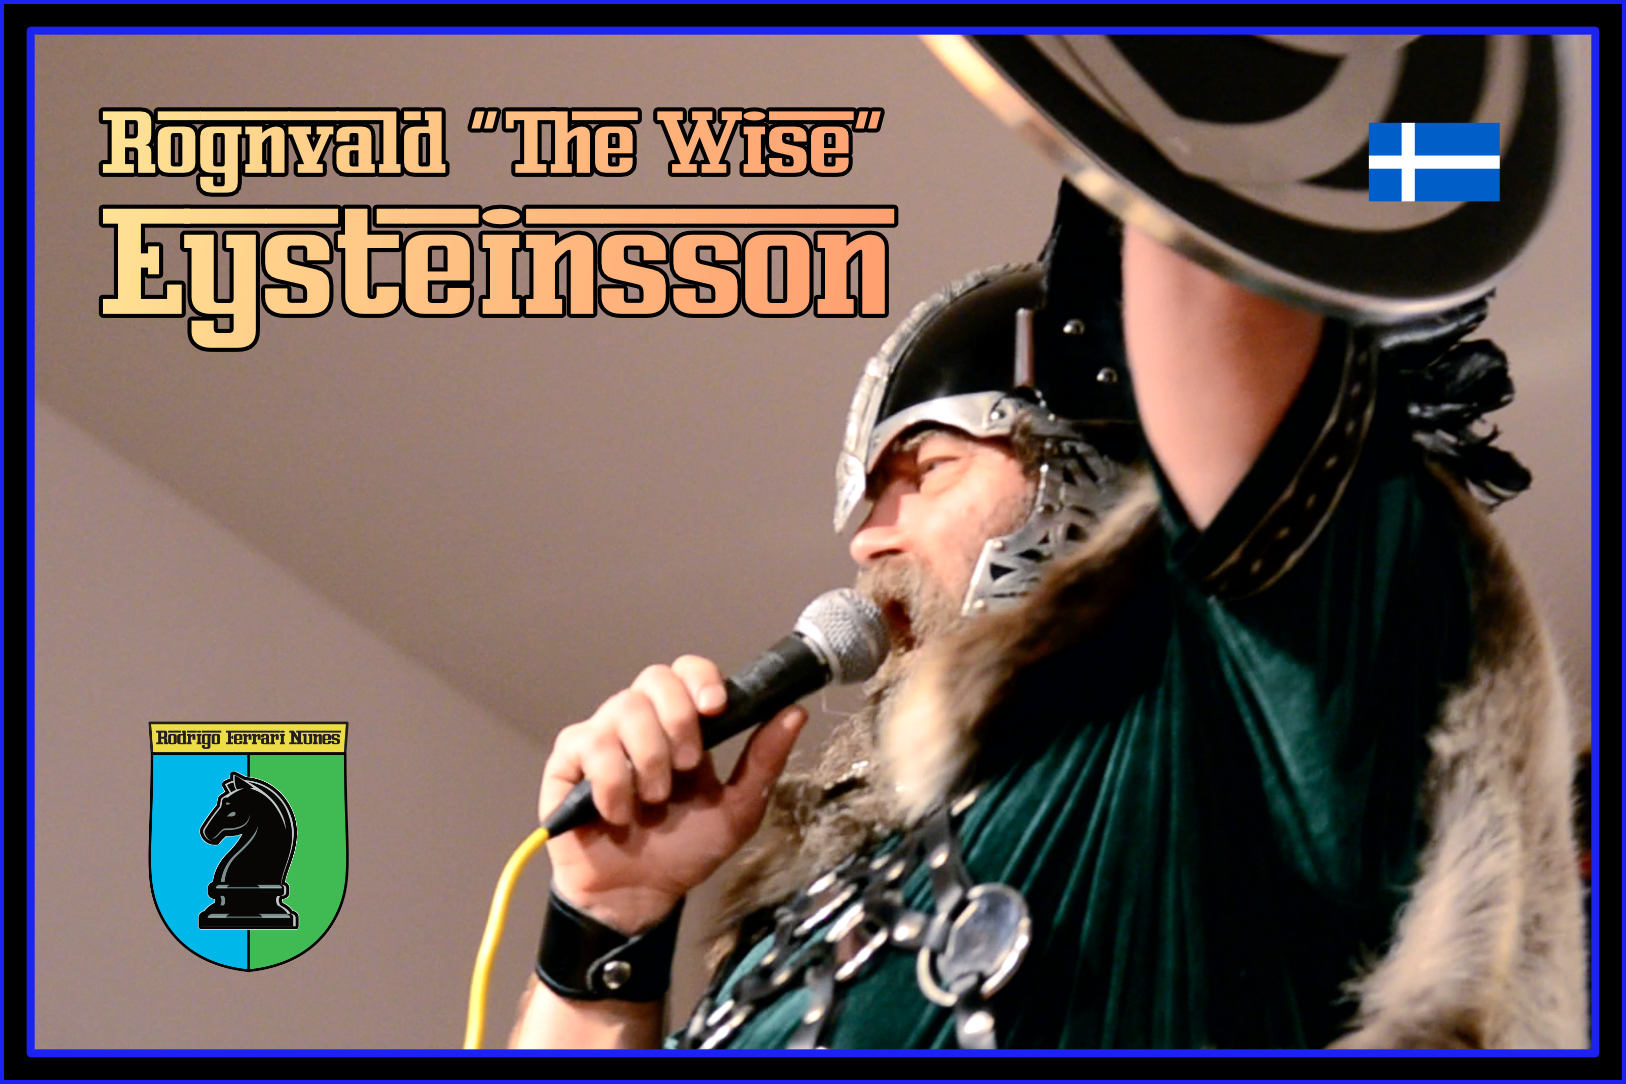 SMUHA HOP 2013: Rognvald “The Wise” Eysteinsson